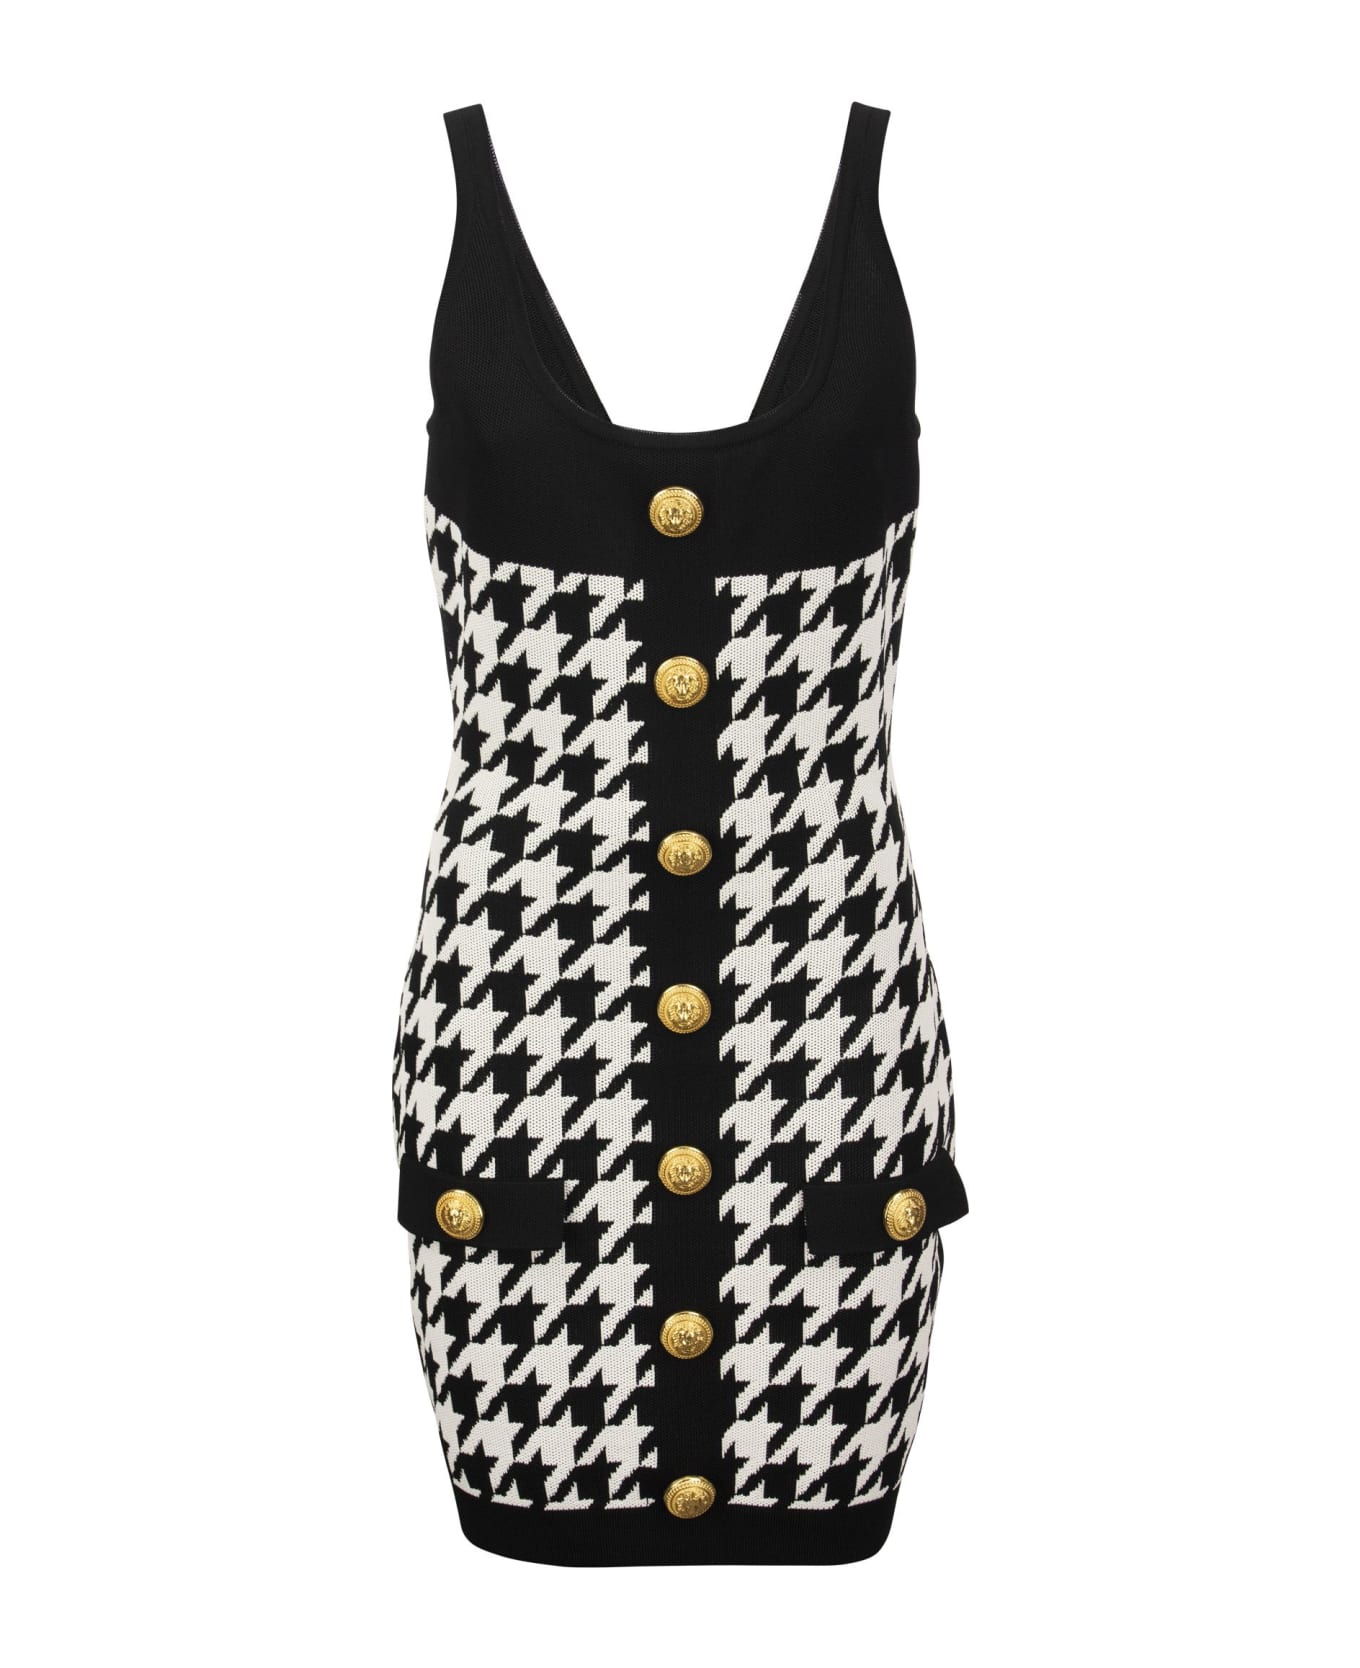 Balmain Short Knit Dress With Gold Buttons - Black/white ワンピース＆ドレス